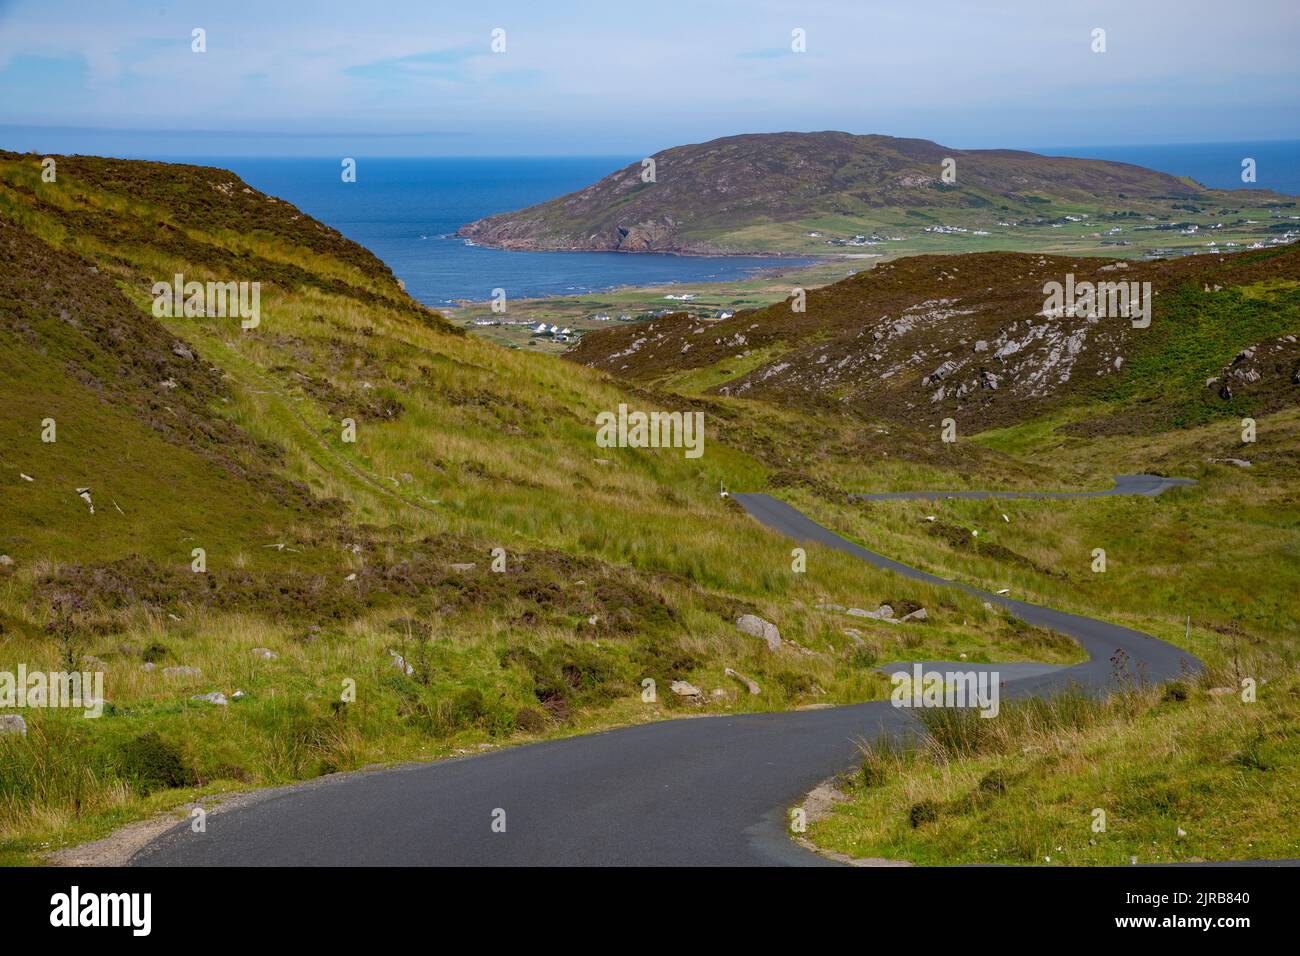 Gap of Mamore from Mamore Well and Grotto looking down to Isle of Doagh, Inishowen, County Donegal, Wild Atlantic Way, Ireland Stock Photo